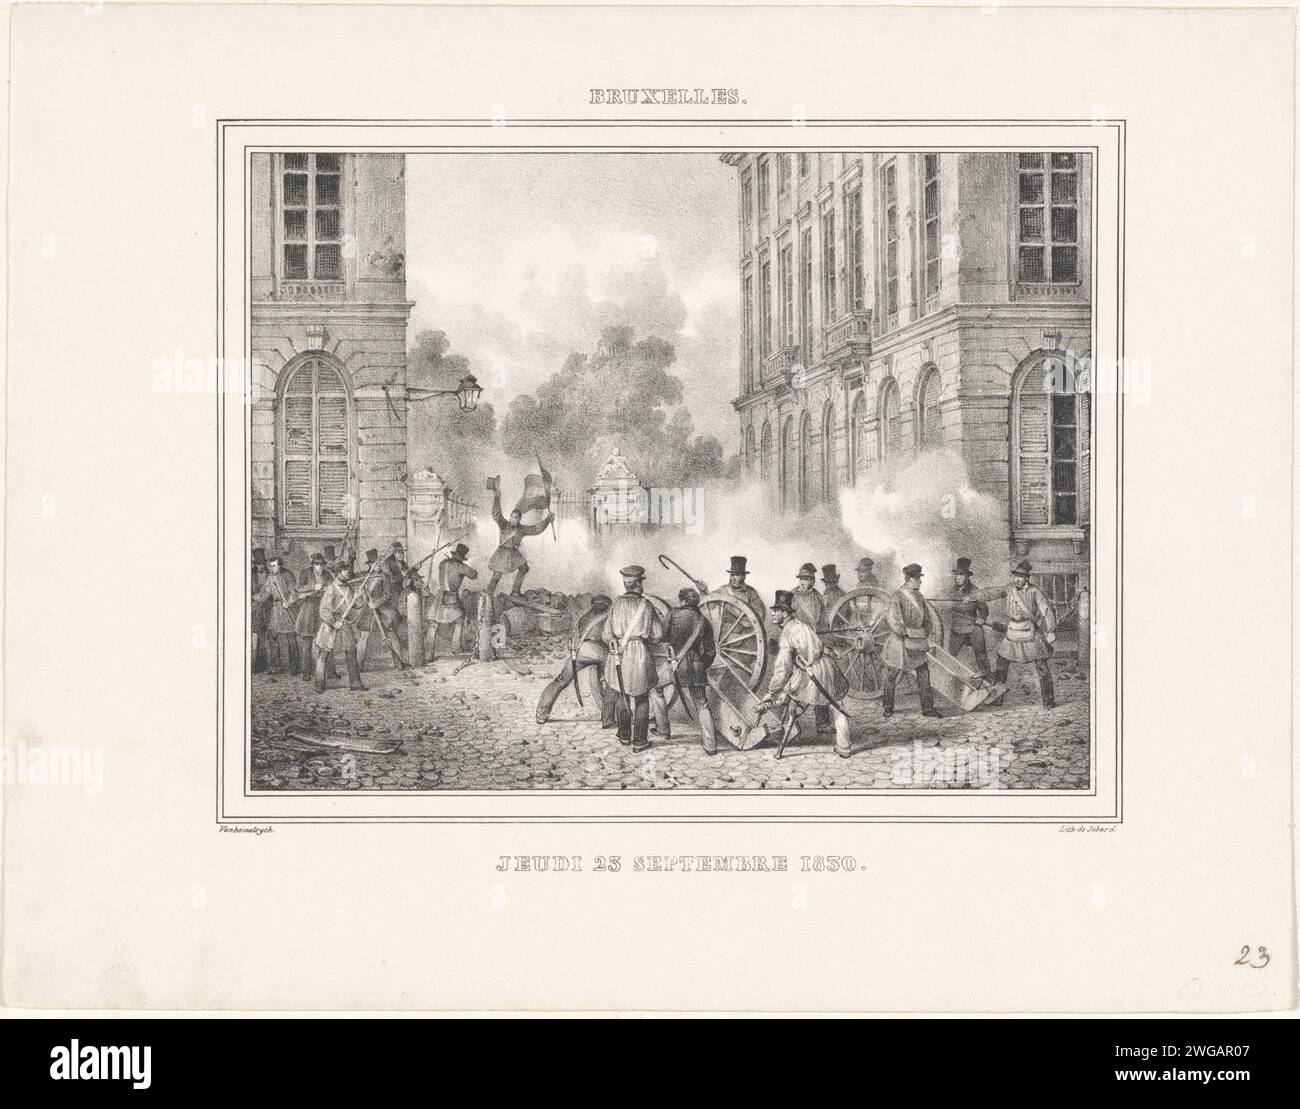 Fighting at the park in Brussels, 1830, Jean -Louis Van Hemelryck, 1830 - 1831 print Belgian insurgents behind a barricade at the Warandepark in Brussels on September 23, 1830. There is Jambe de Bois behind one guns. Part of a group of prints from various other series related to the records in the Recueil about the events during the Belgian Revolution in Brussels, Antwerp and other cities in the period 25 August 1830 to 27 March 1831. Brussels paper  barricades  riot Brussels. Wara -park Stock Photo